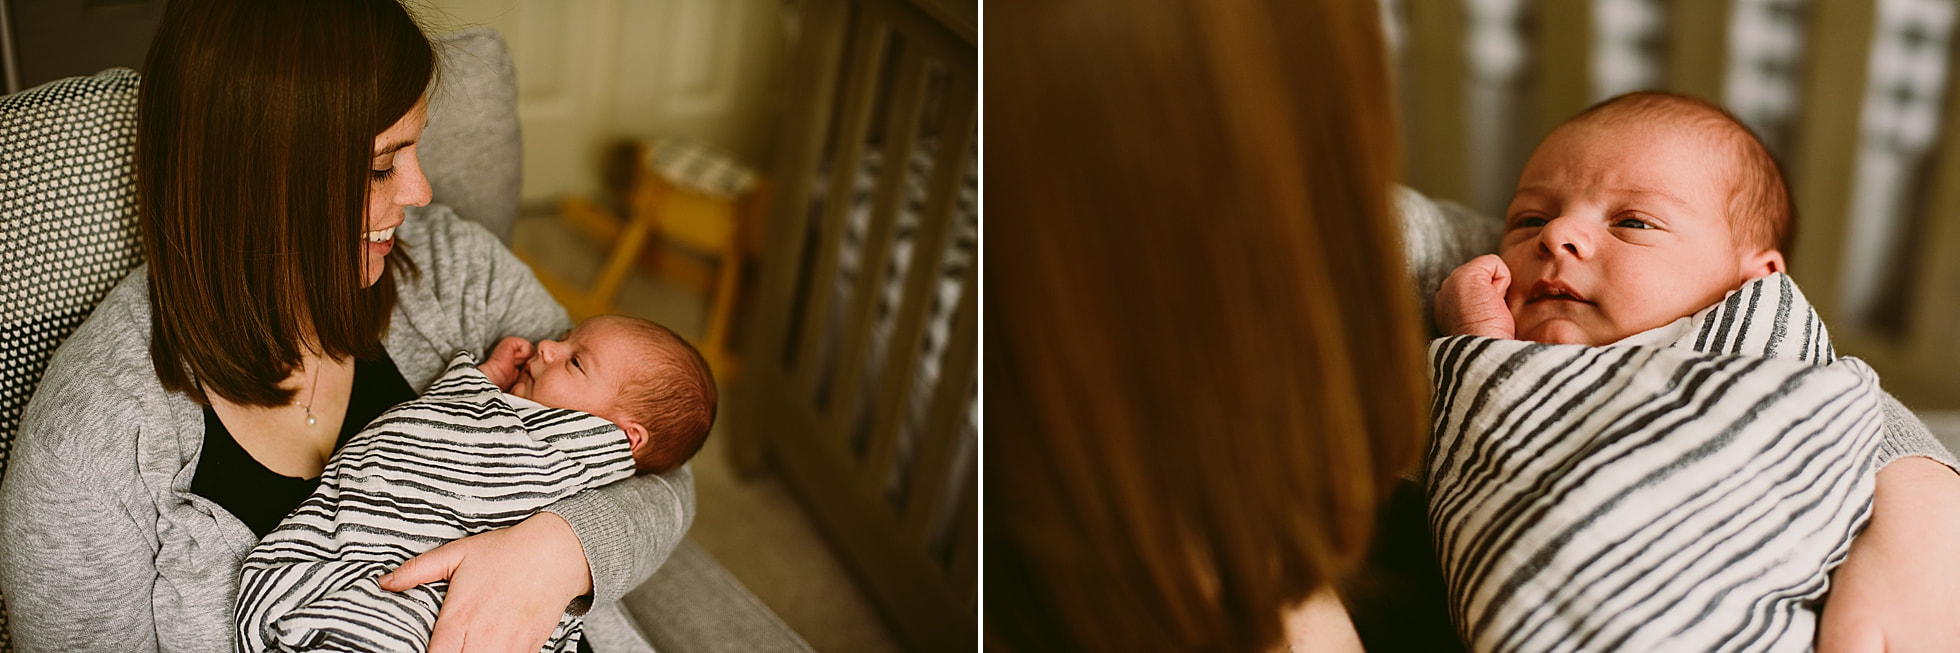 Mother and newborn moments during an at-home photography session by Laura Richards